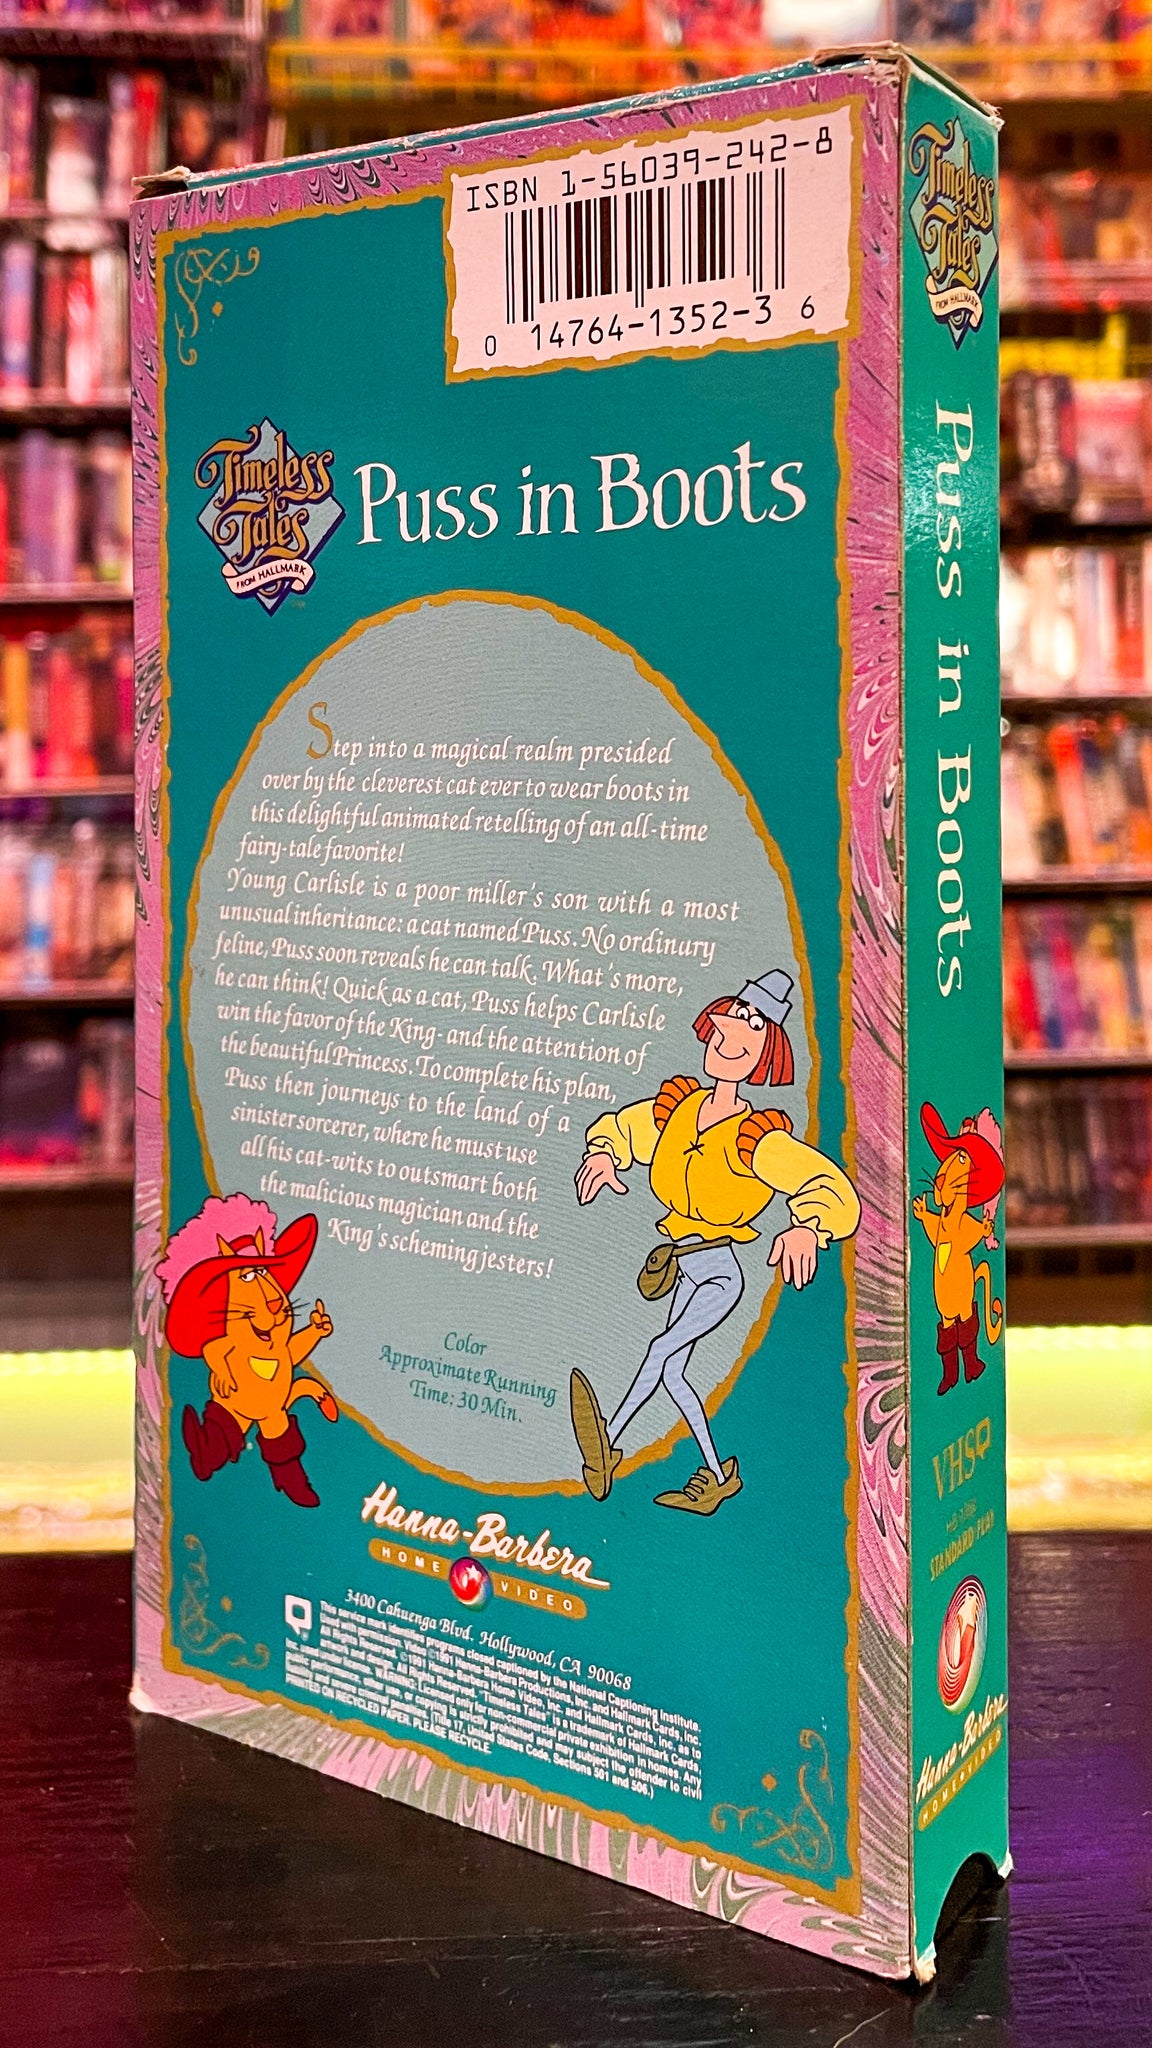 Timeless Tales From Hallmark: Puss in Boots